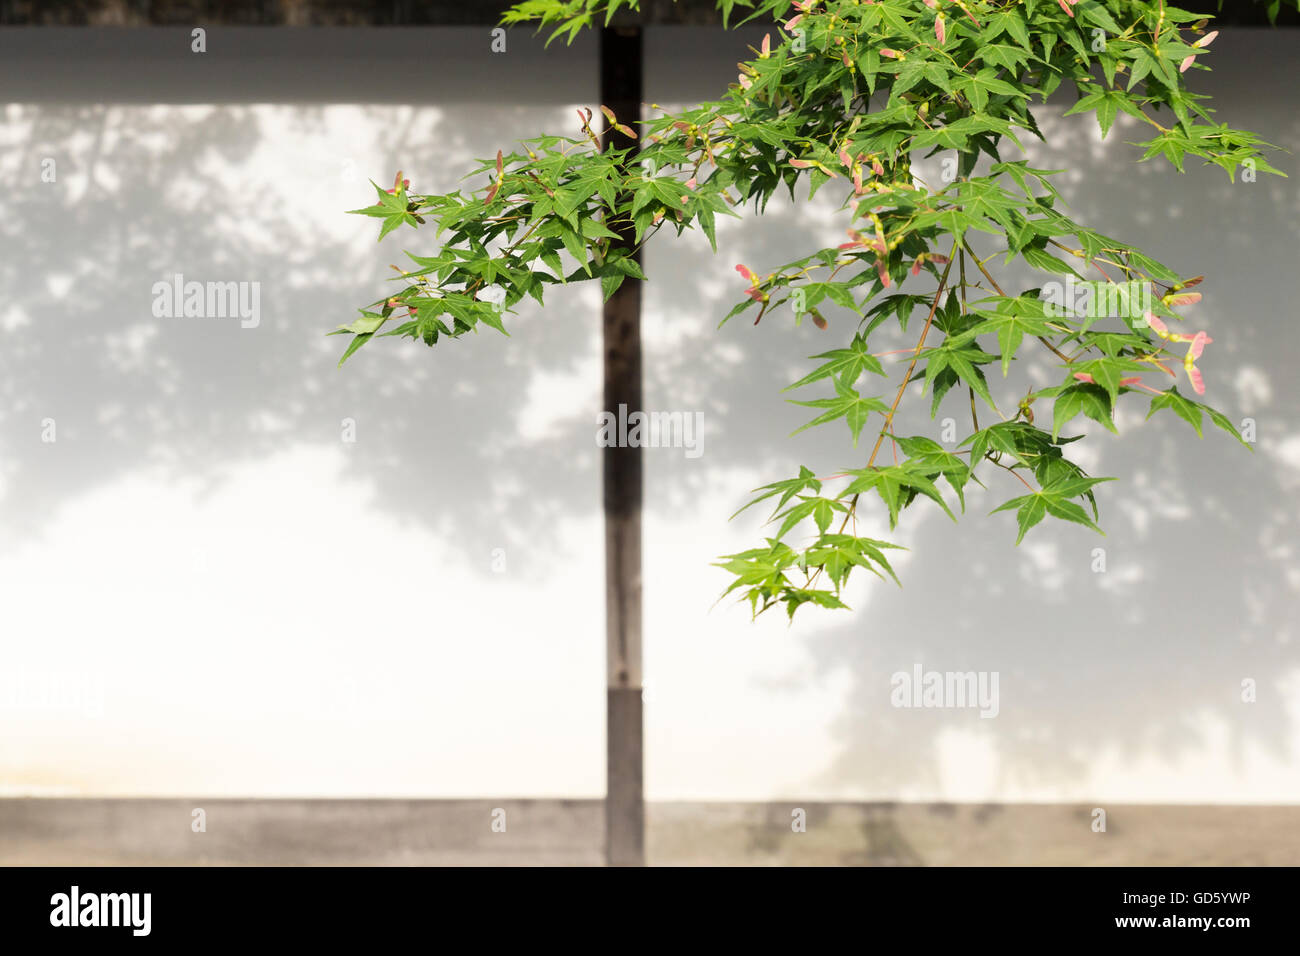 A branch of a Japanese maple tree with green leaves hanging in front of a white wall with brown wooden beams Stock Photo